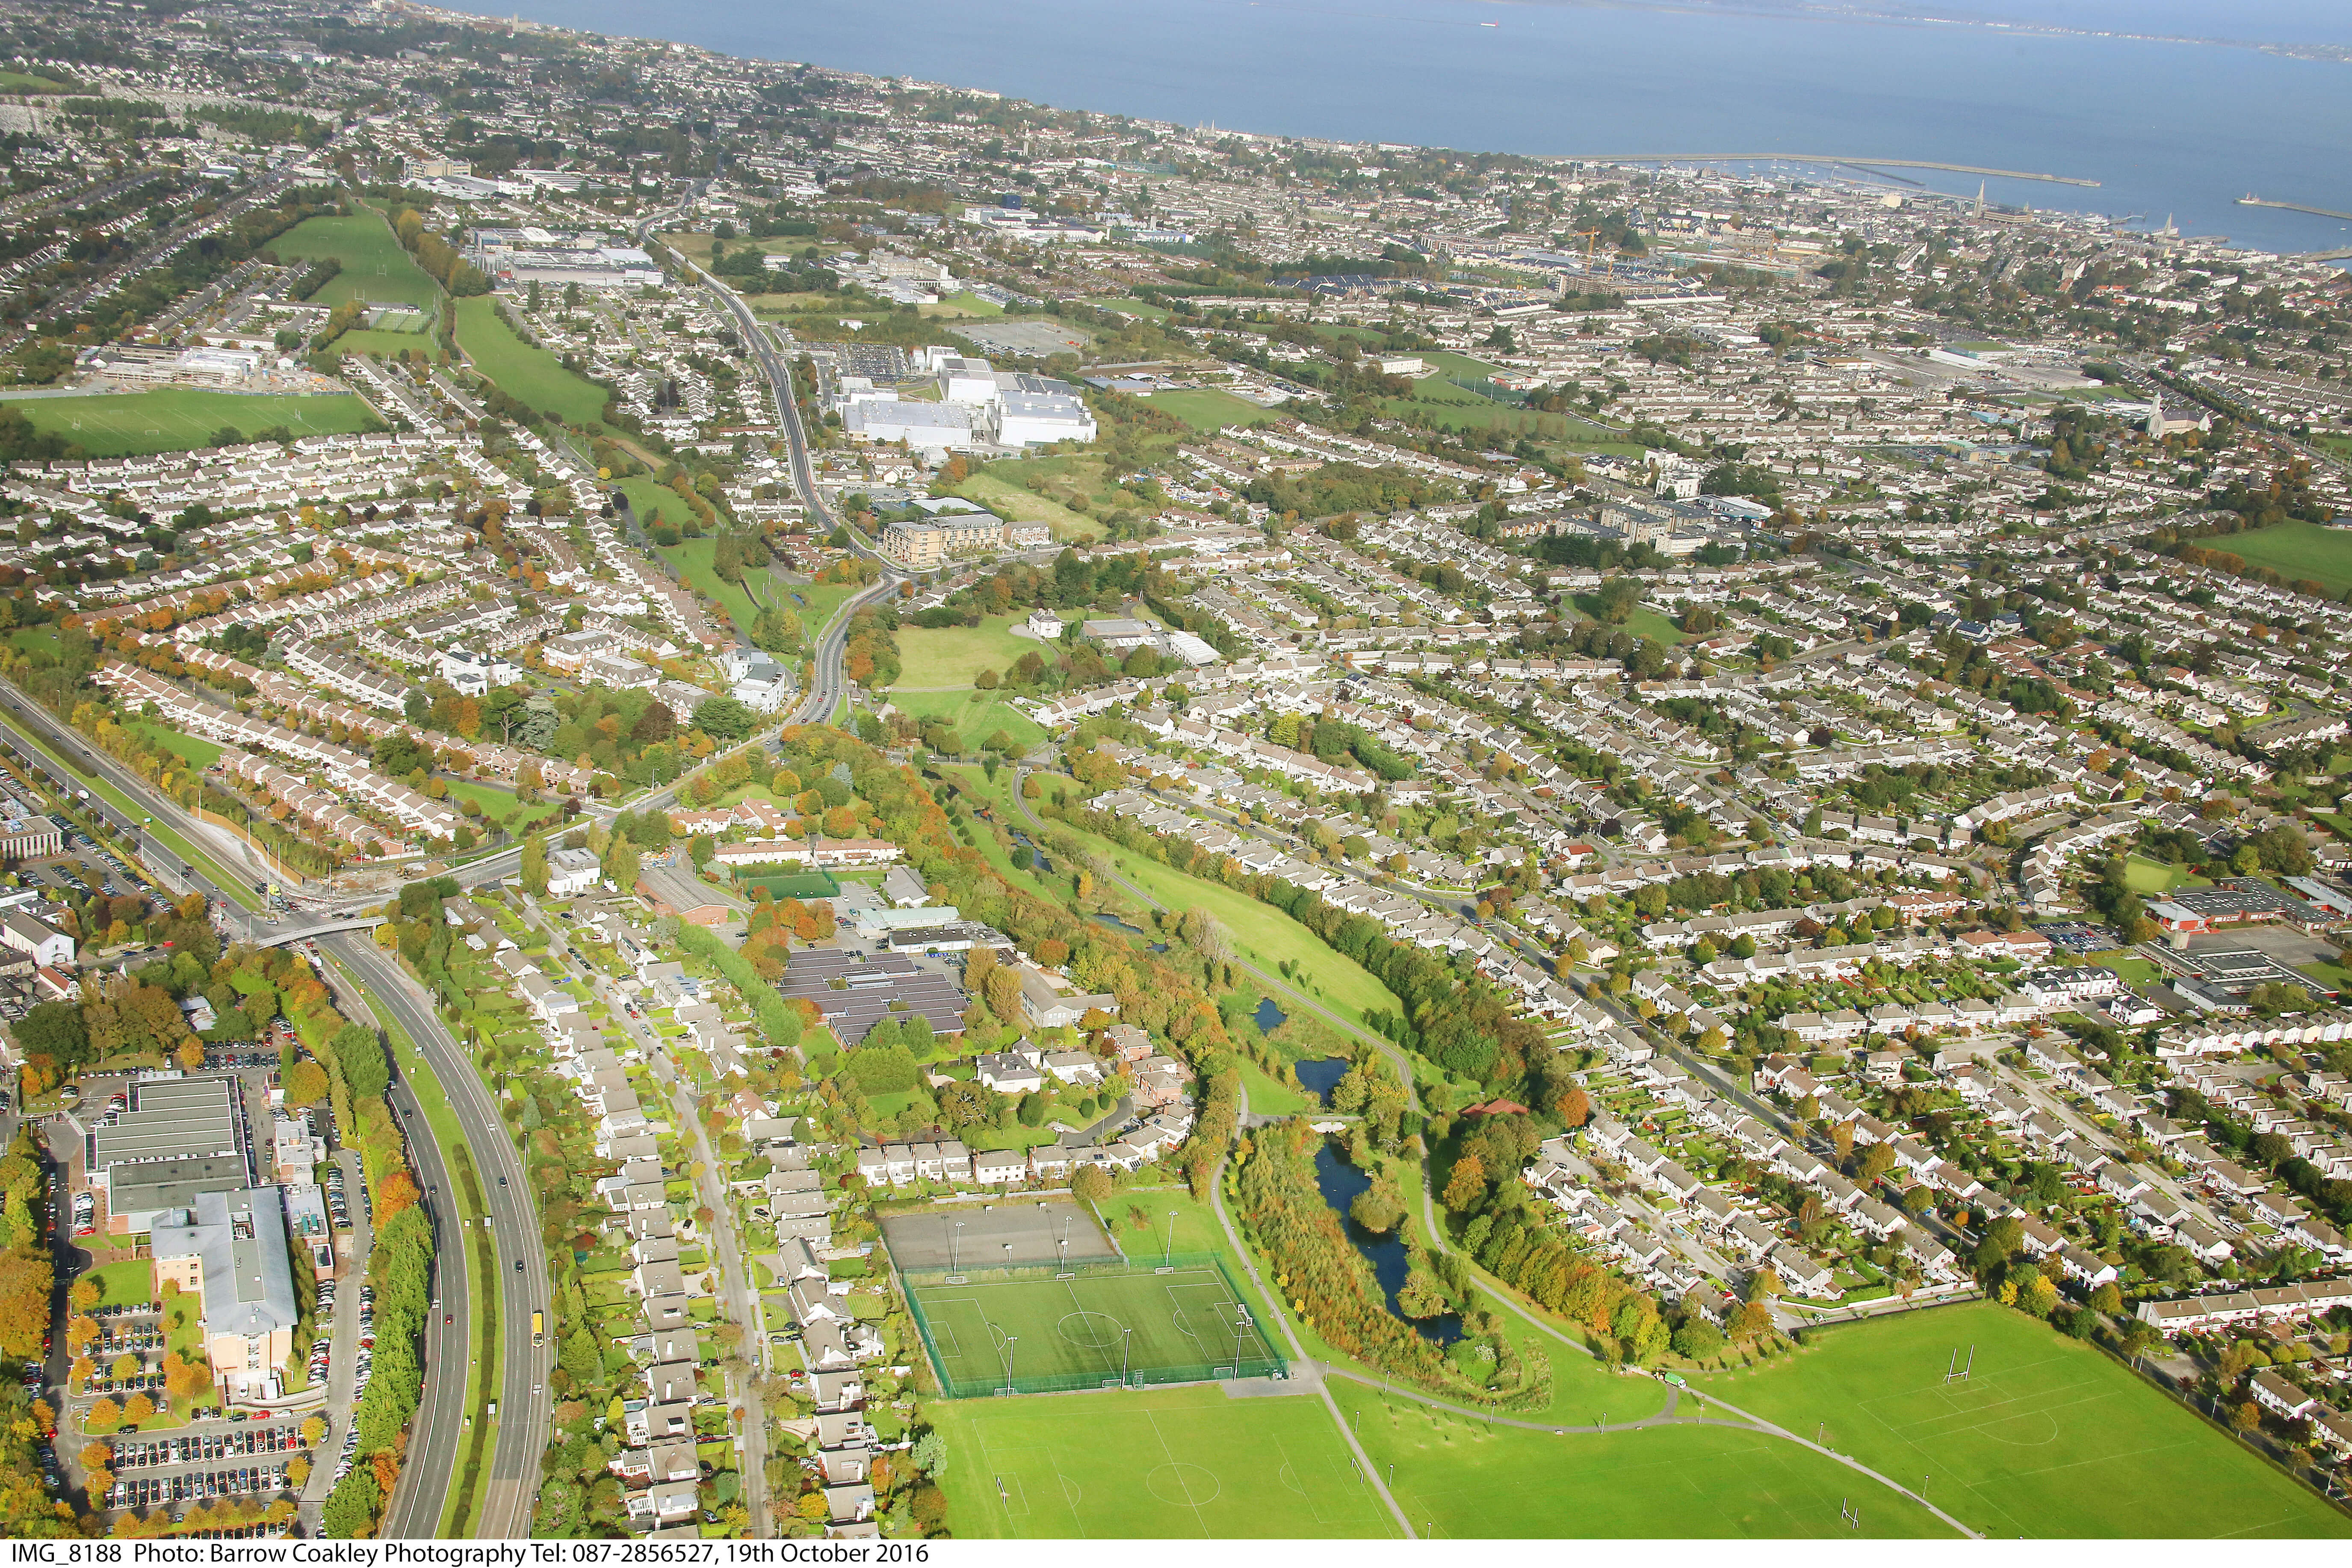 Image 5: aerial view of Kilbogget Park